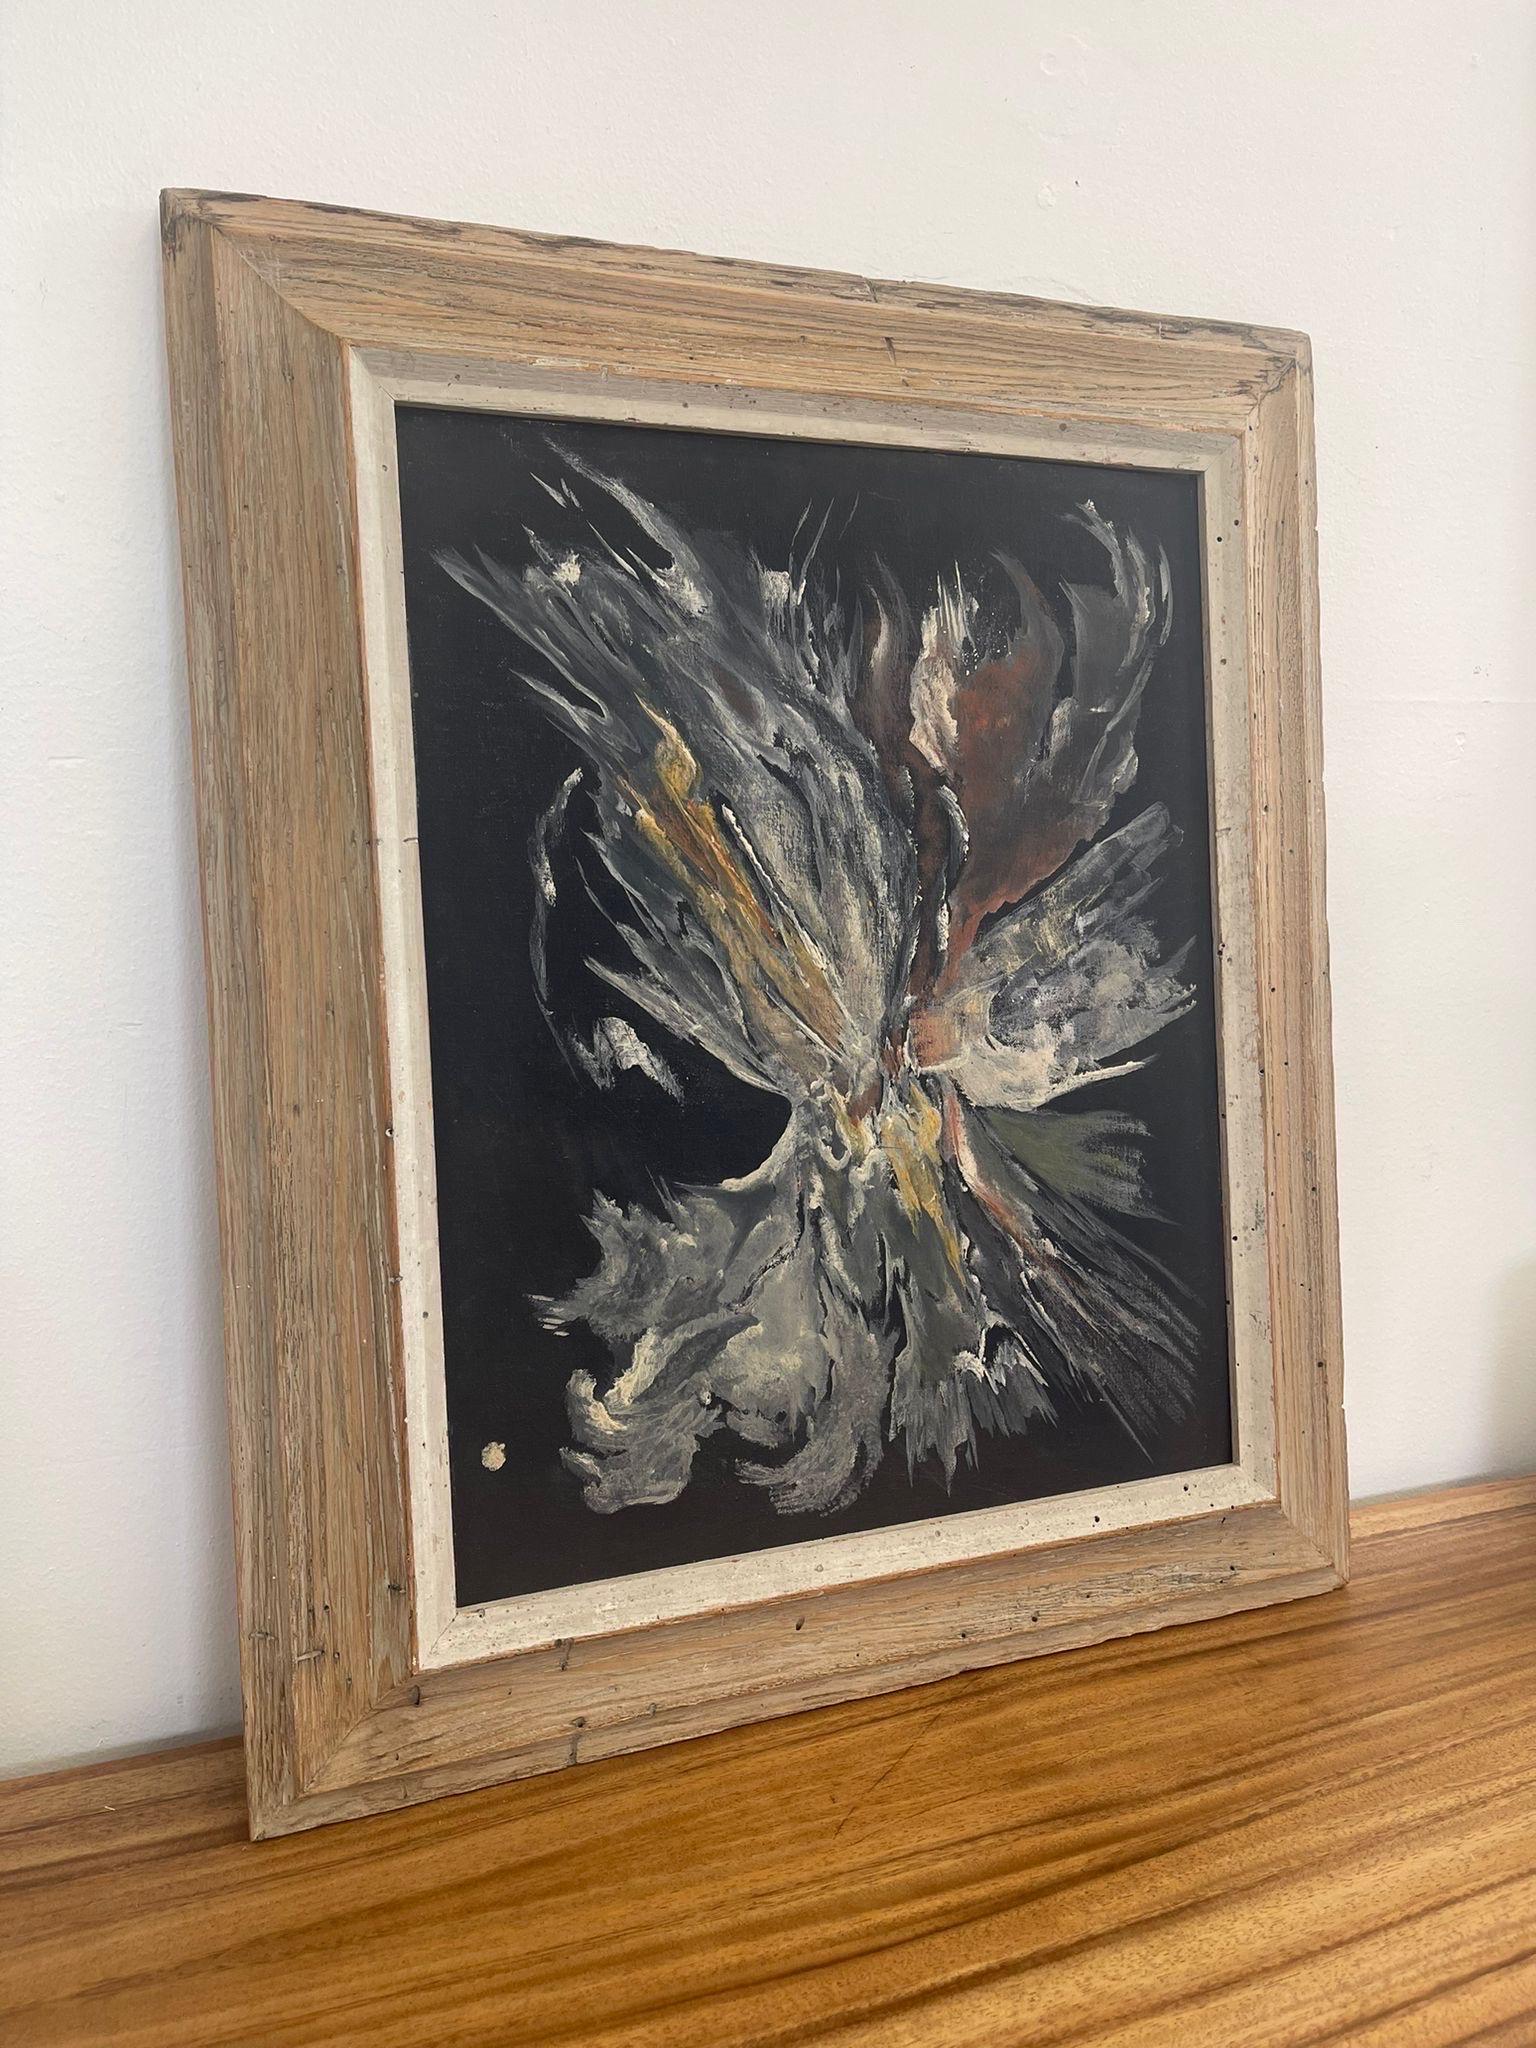 Vintage painting within wooden frame by Artist Grutla Stimson. Possibly acrylic. Abstract Painting with Black and white tones. Possibly Circa 1970s. Vintage Condition Consistent with Age as Pictured.

Dimensions. 22 W ; 1 D ; 26 H